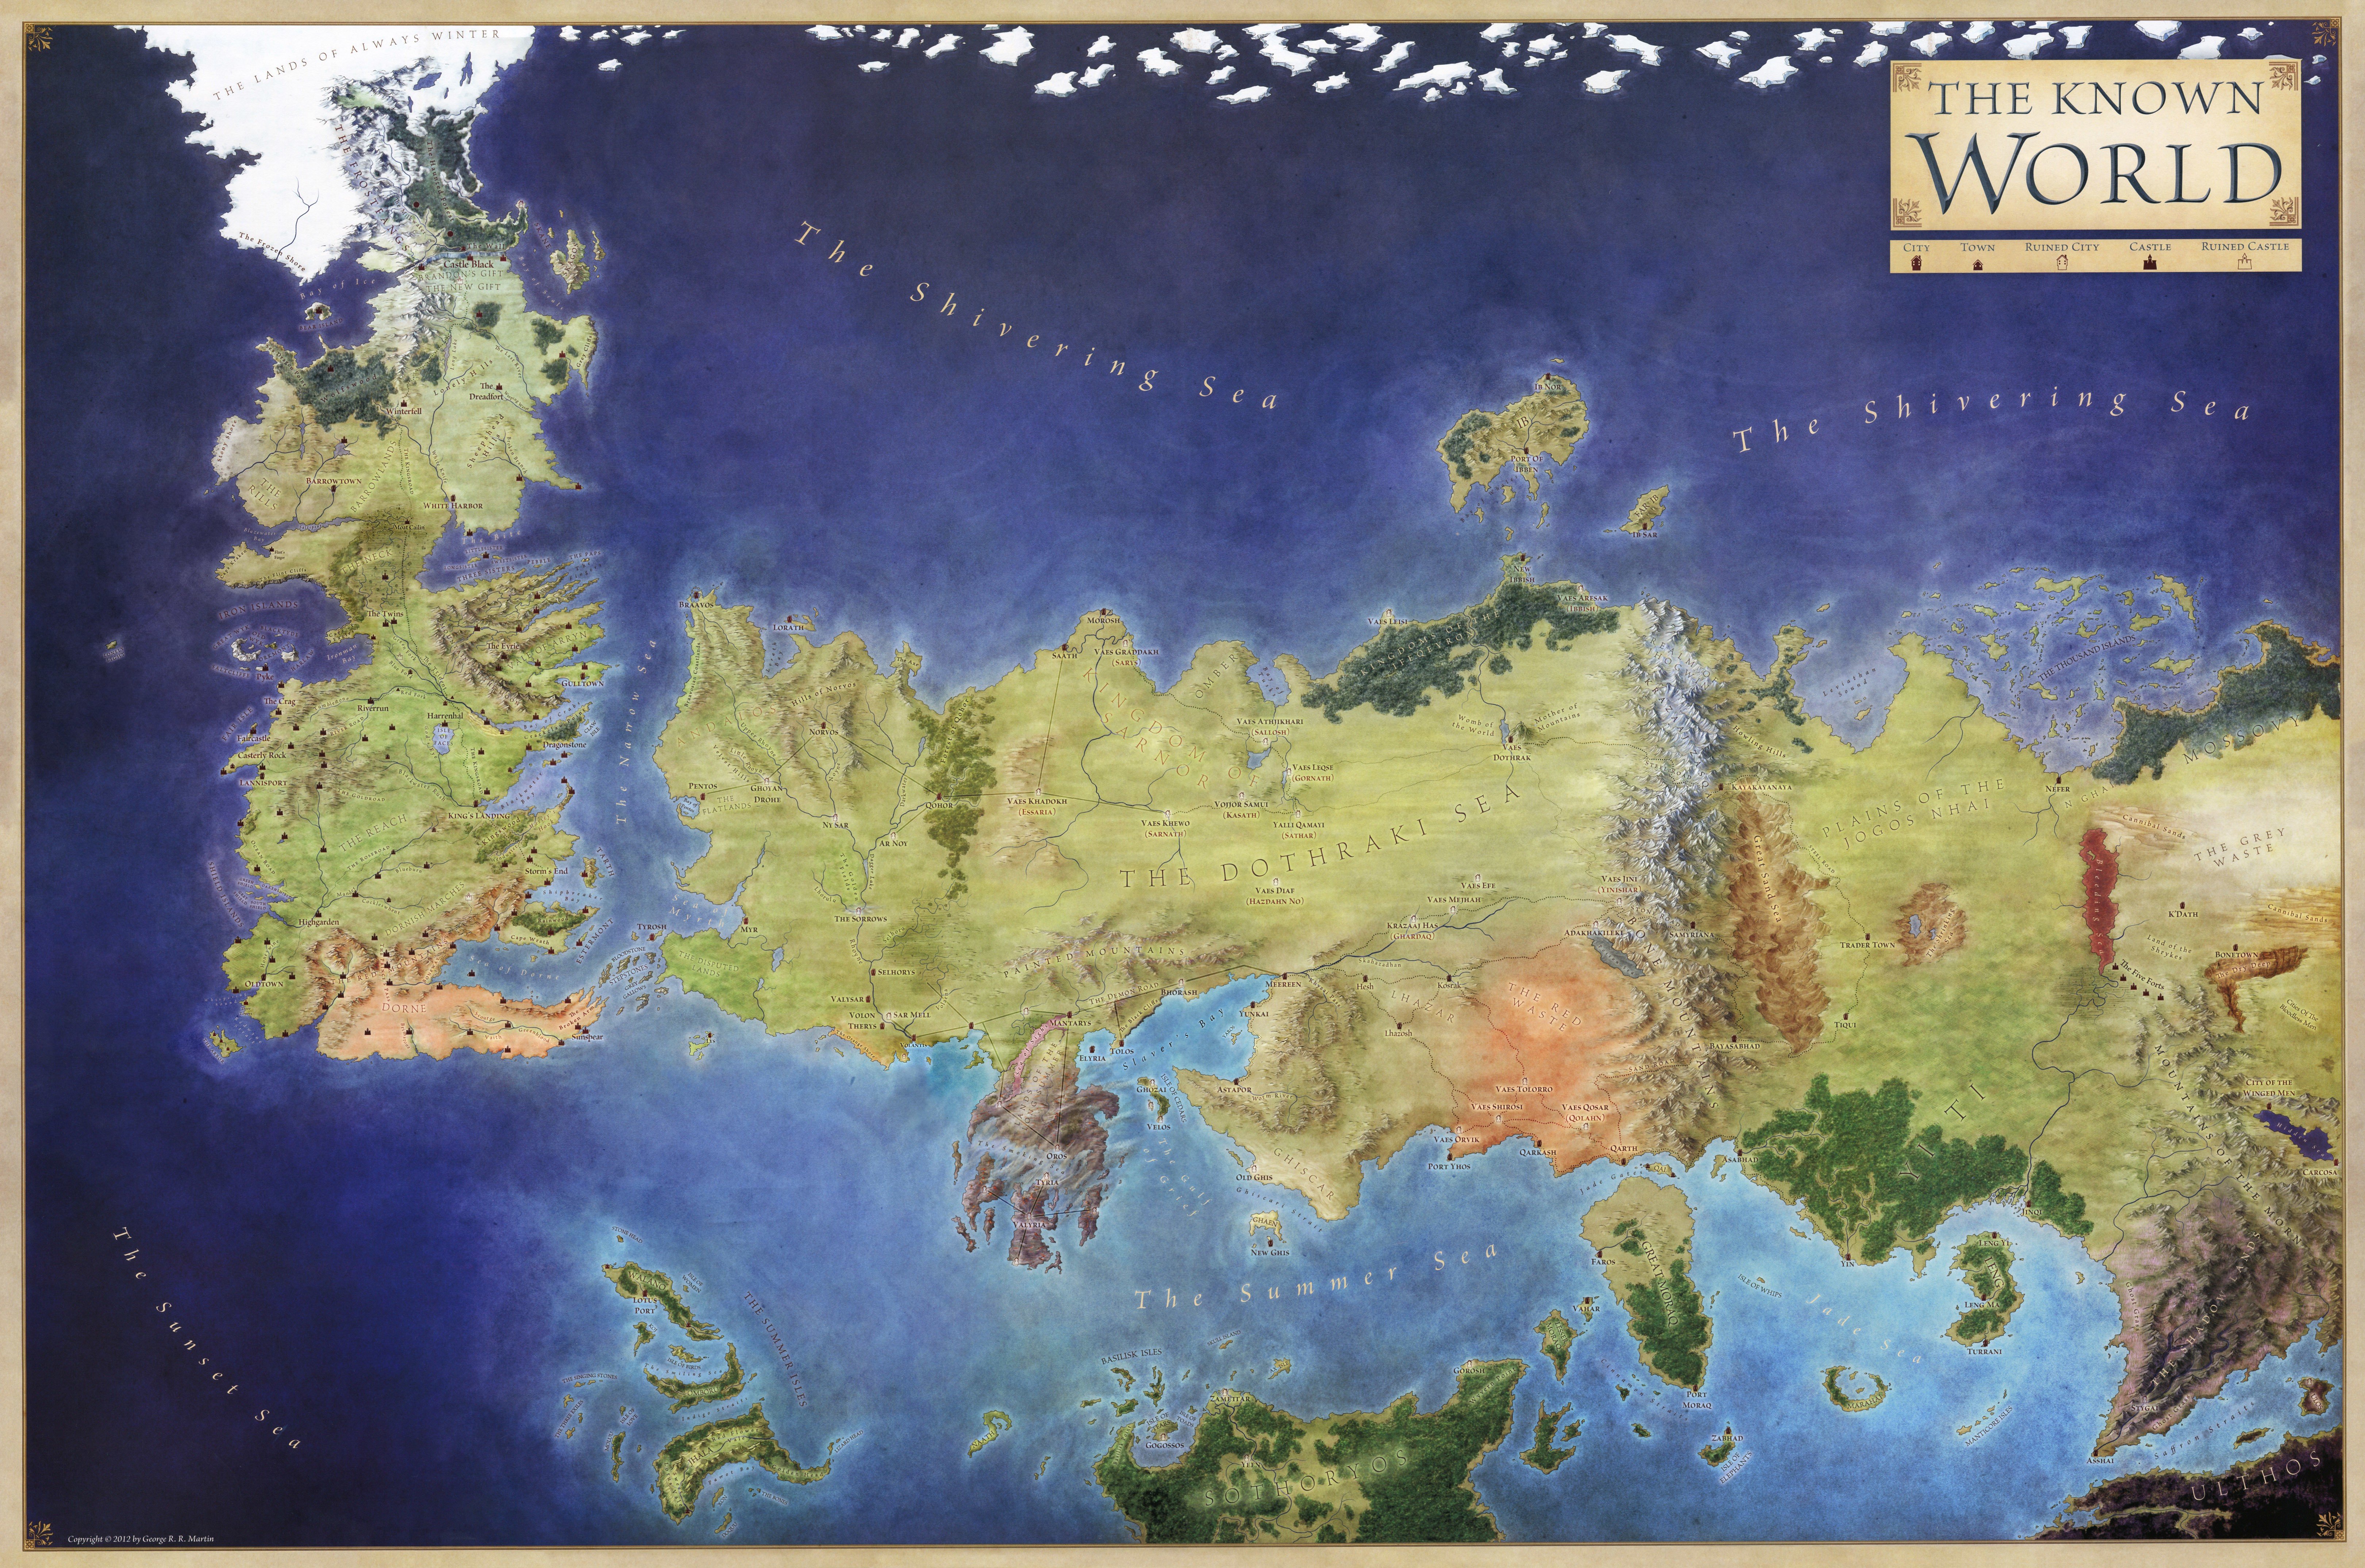 Westeros, Backgound, A Song of Ice and Fire, Game of Thrones, World, Map Wallpaper